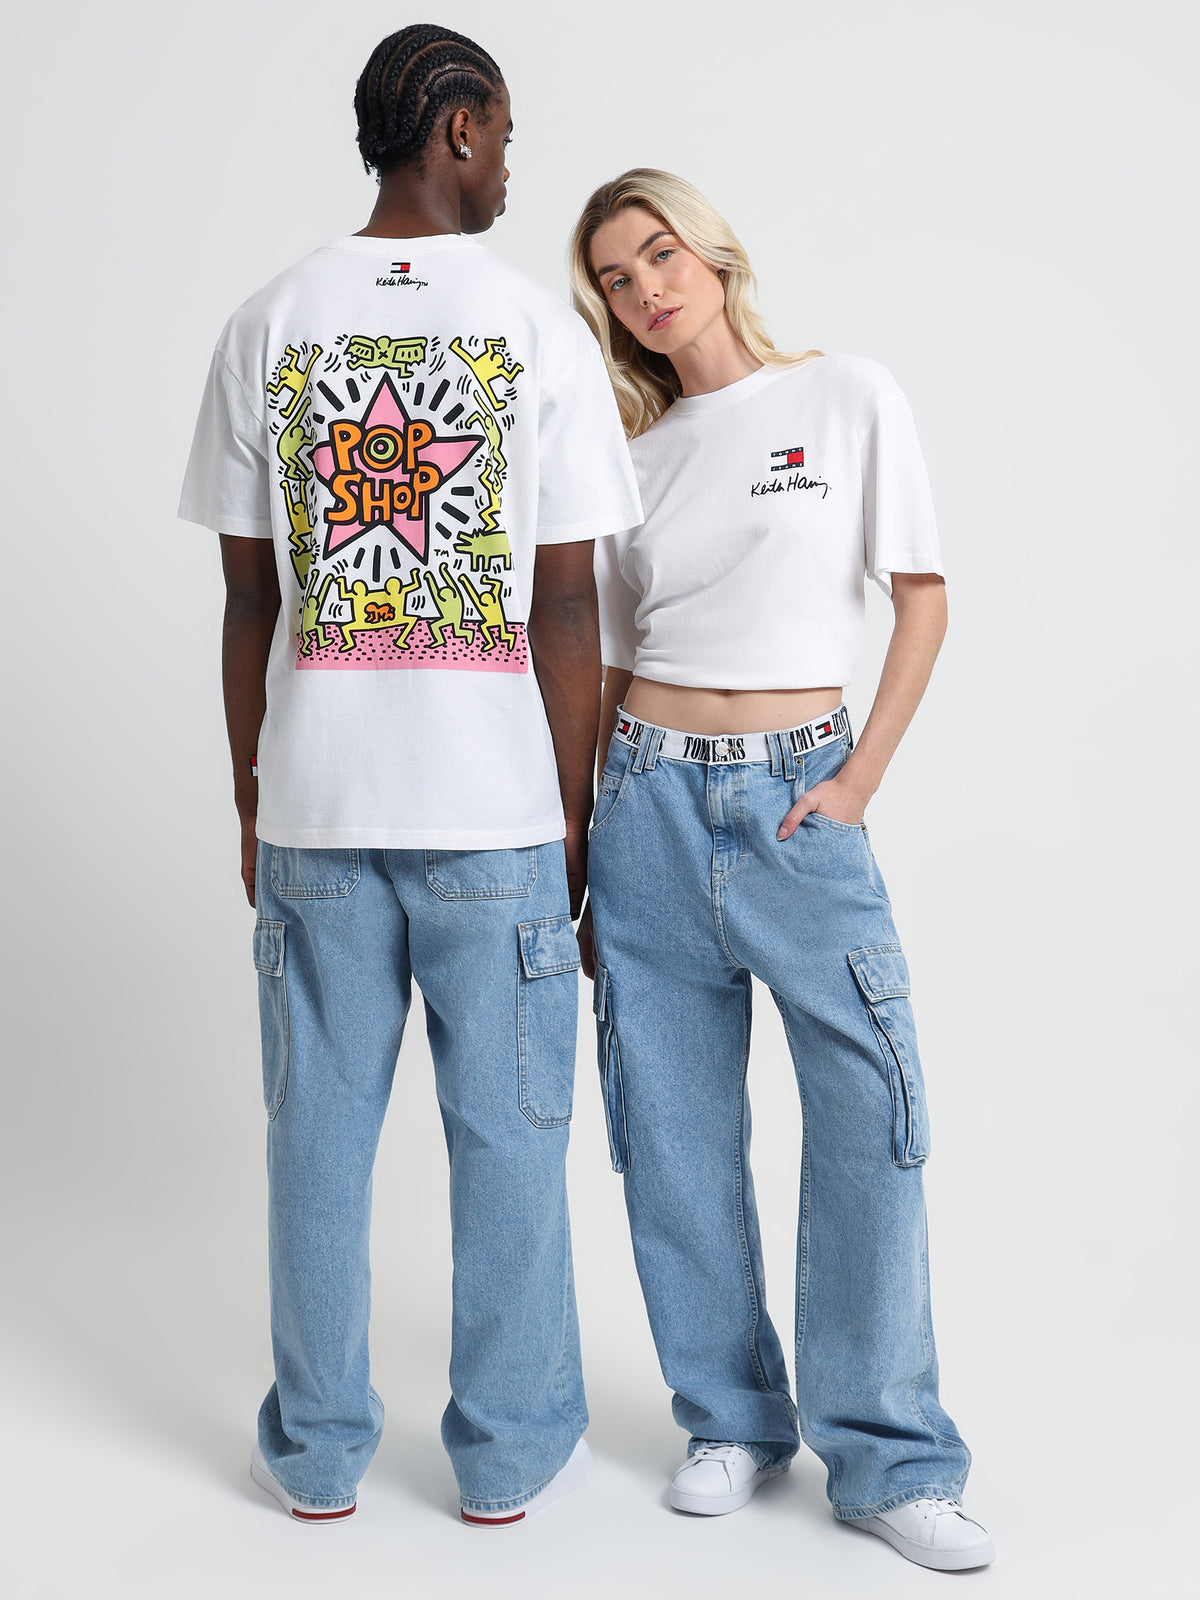 Keith Haring T-Shirt in White &amp; Pop Shop